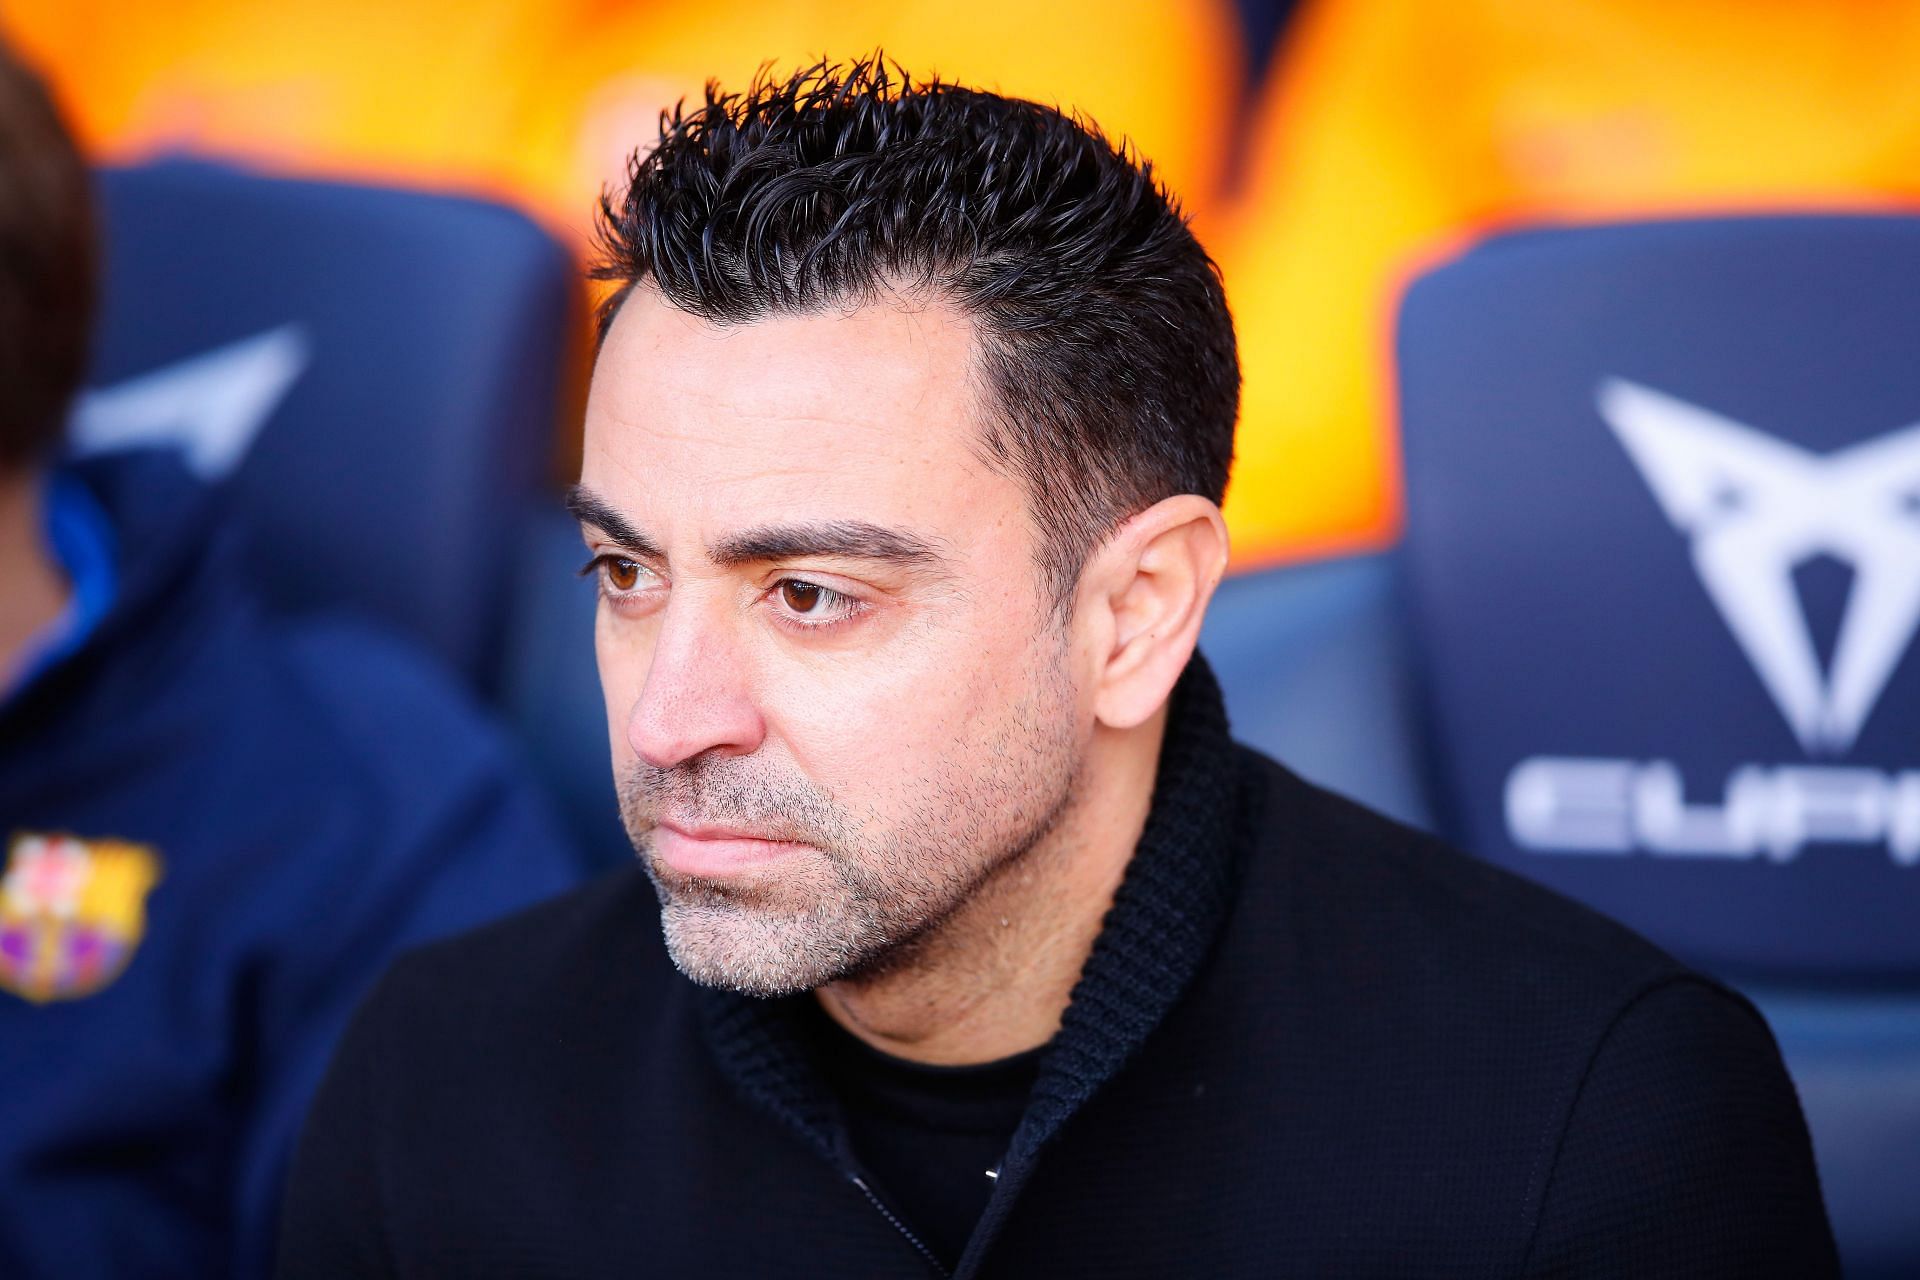 Barcelona manager Xavi Hernandez is determined to drive his team back to glory.